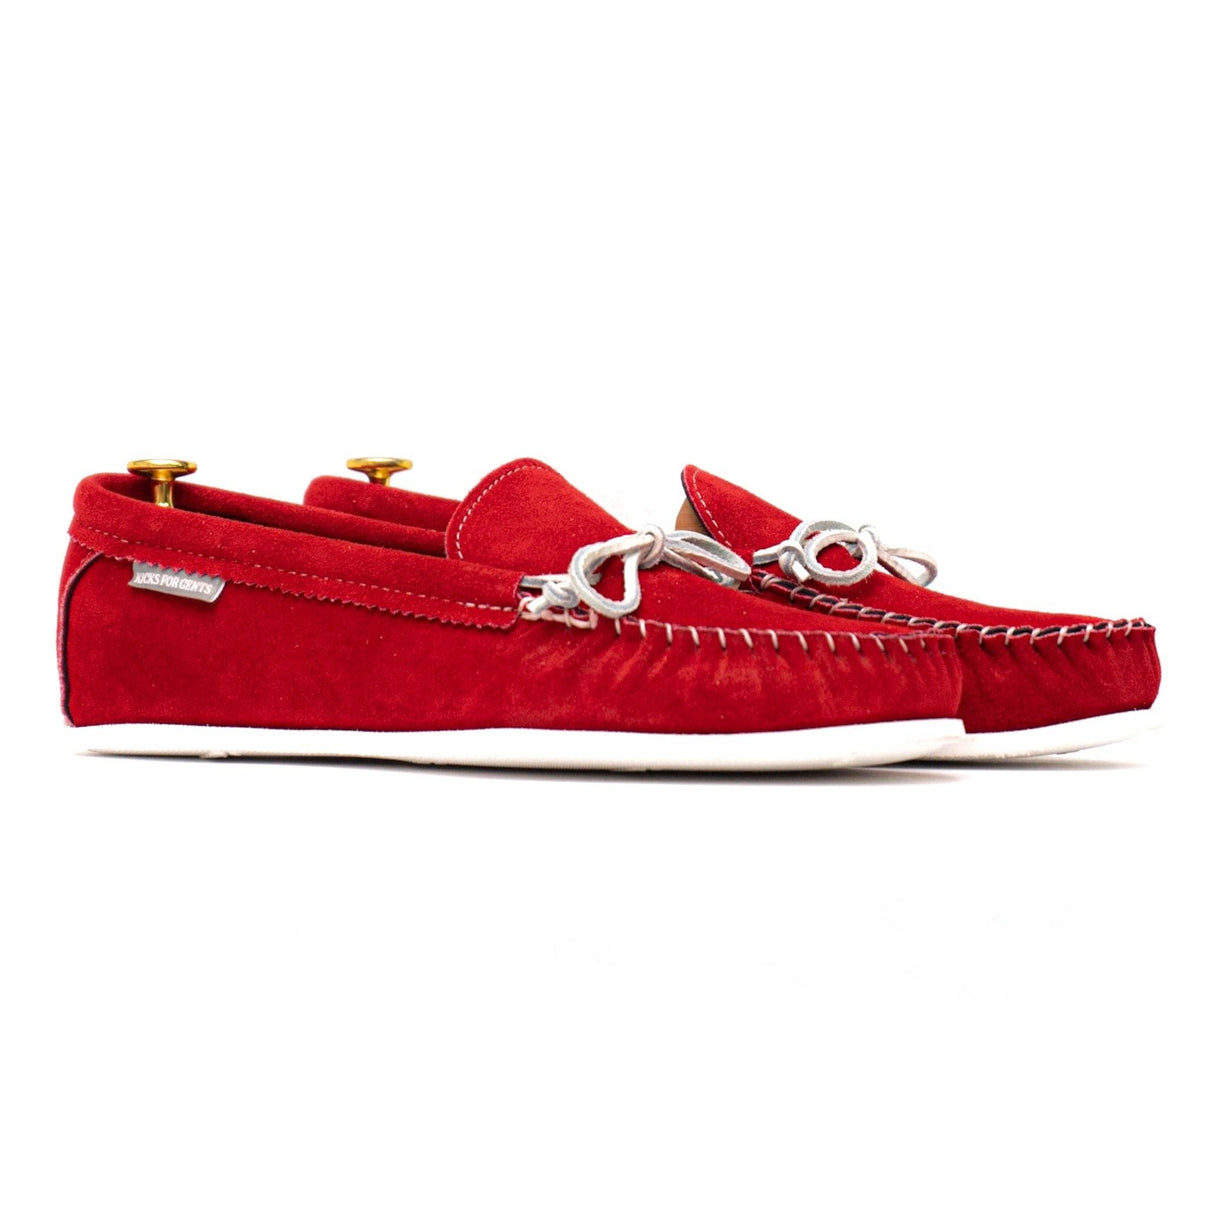 Spring Grove USA Moccasins - Red Suede – Kicks For Gents